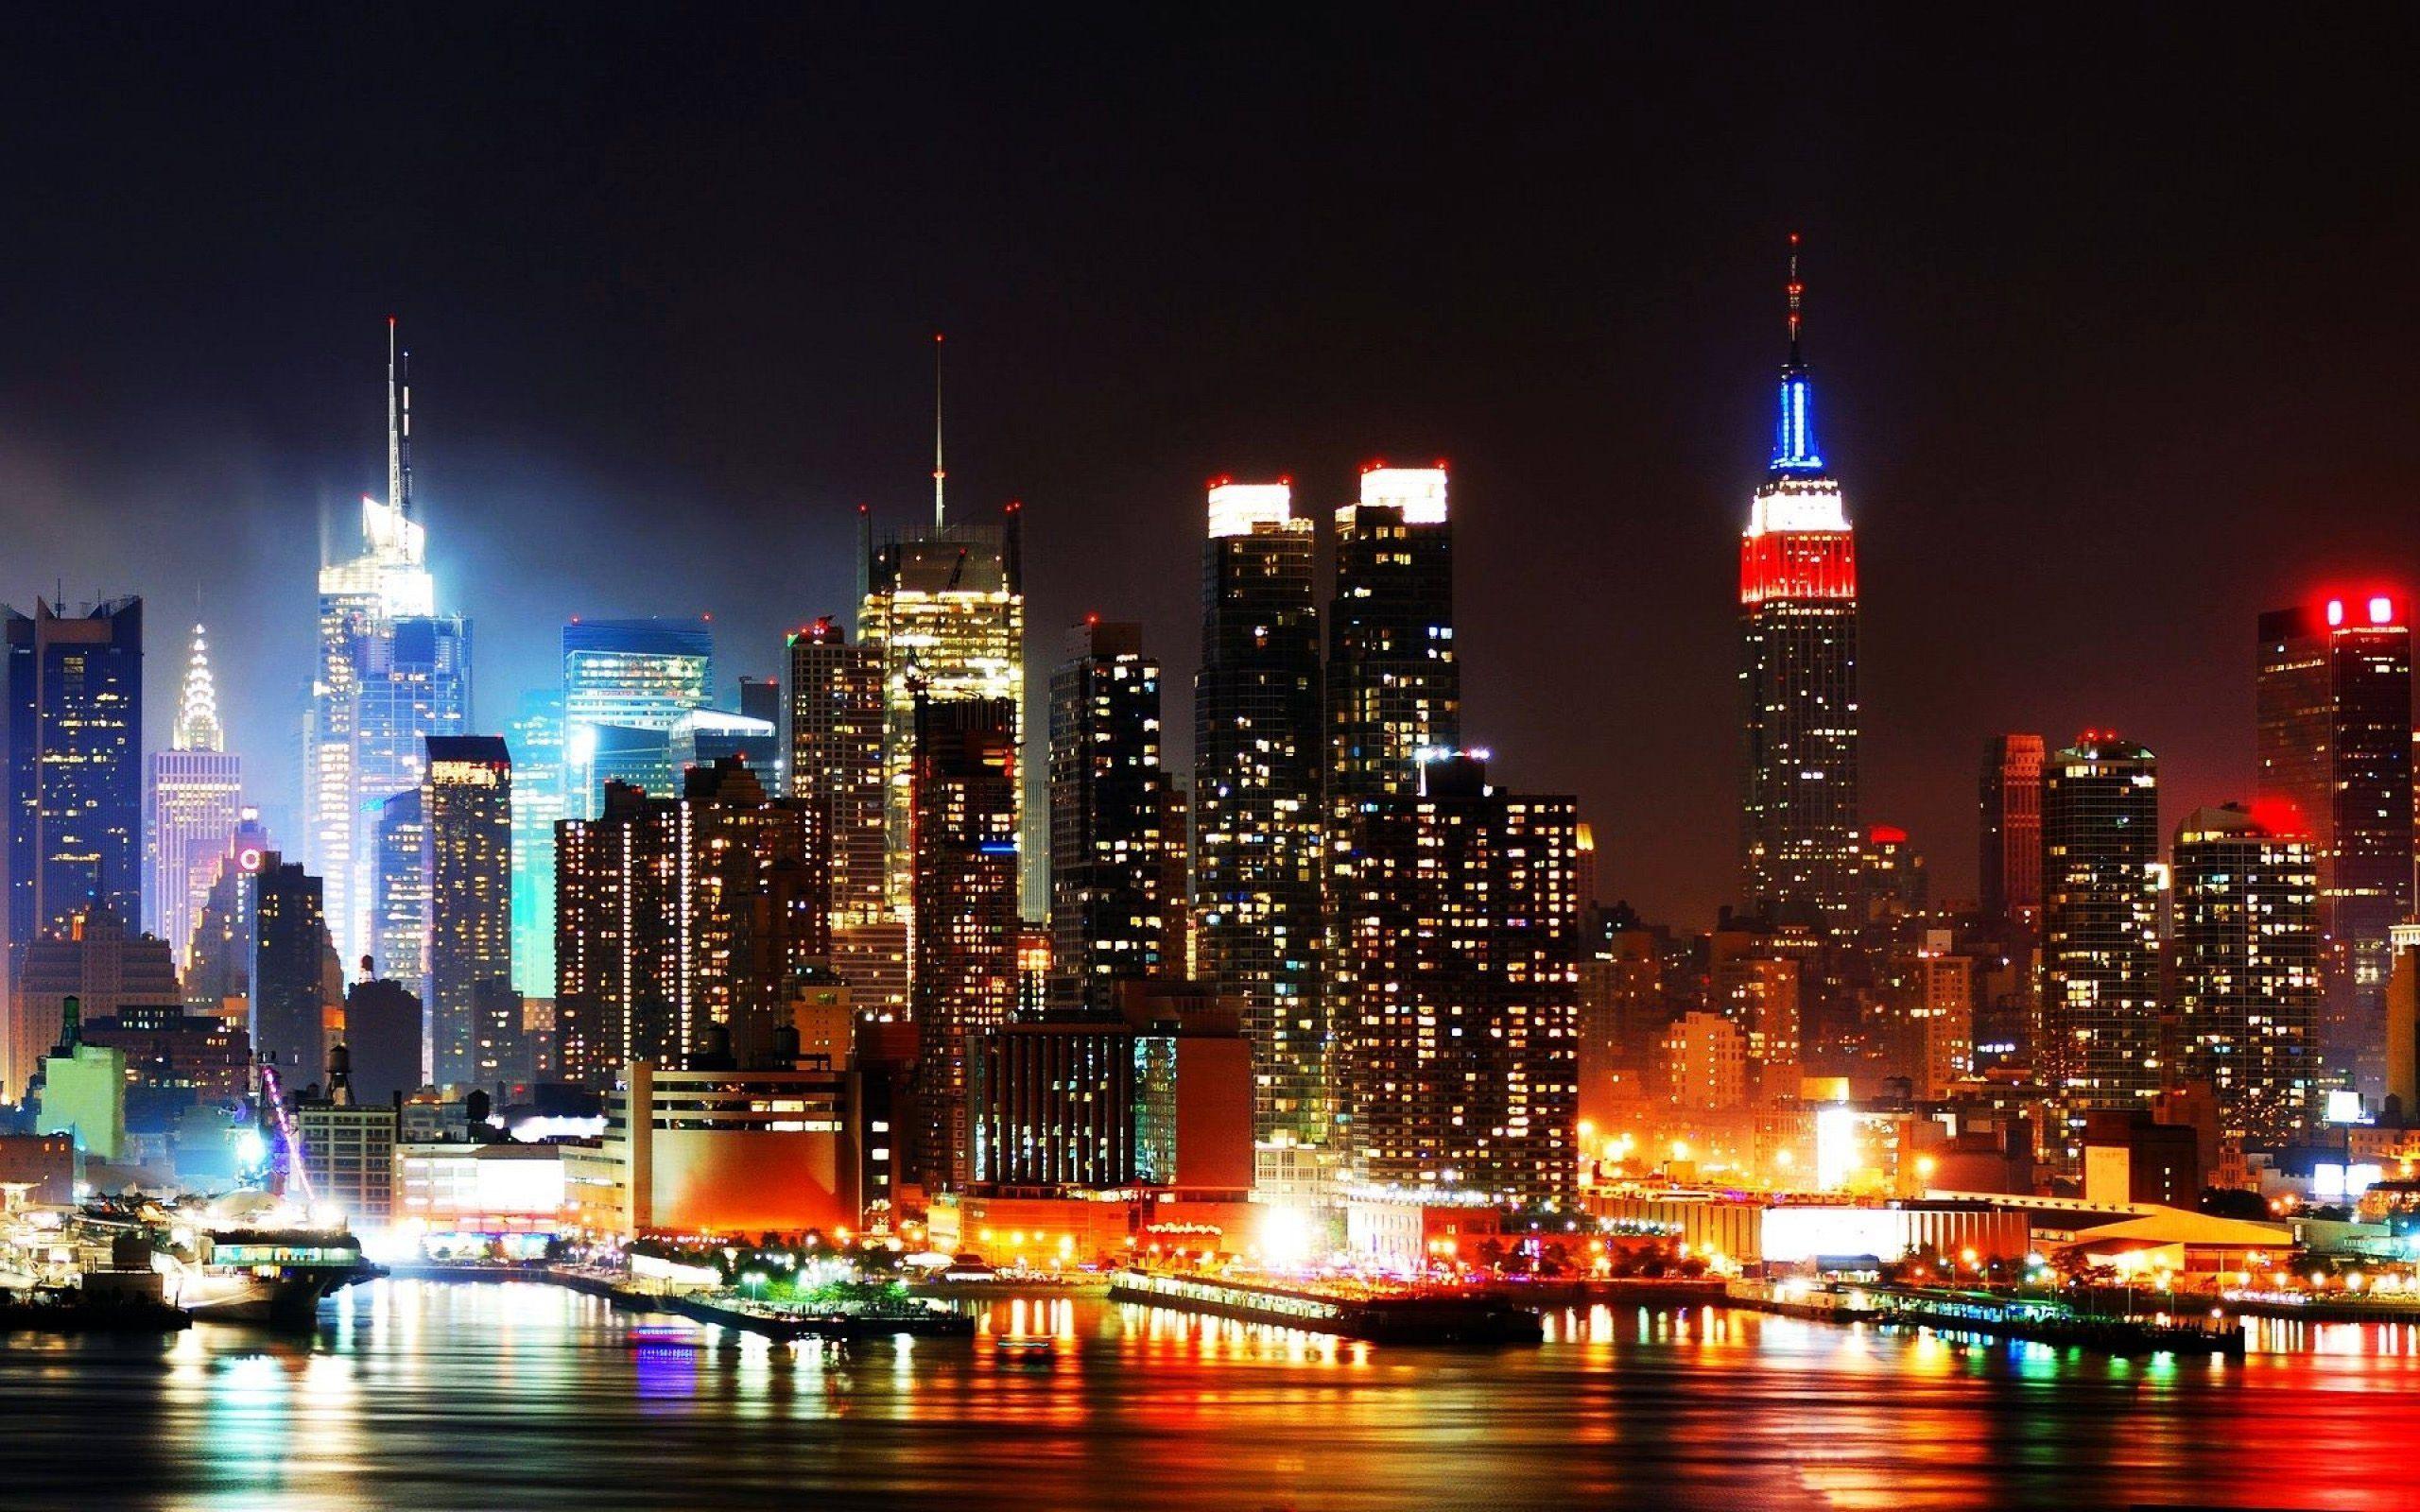 Time Lapse Captures Stunning Sights of NYC [VIDEO] #bigappled #nyc